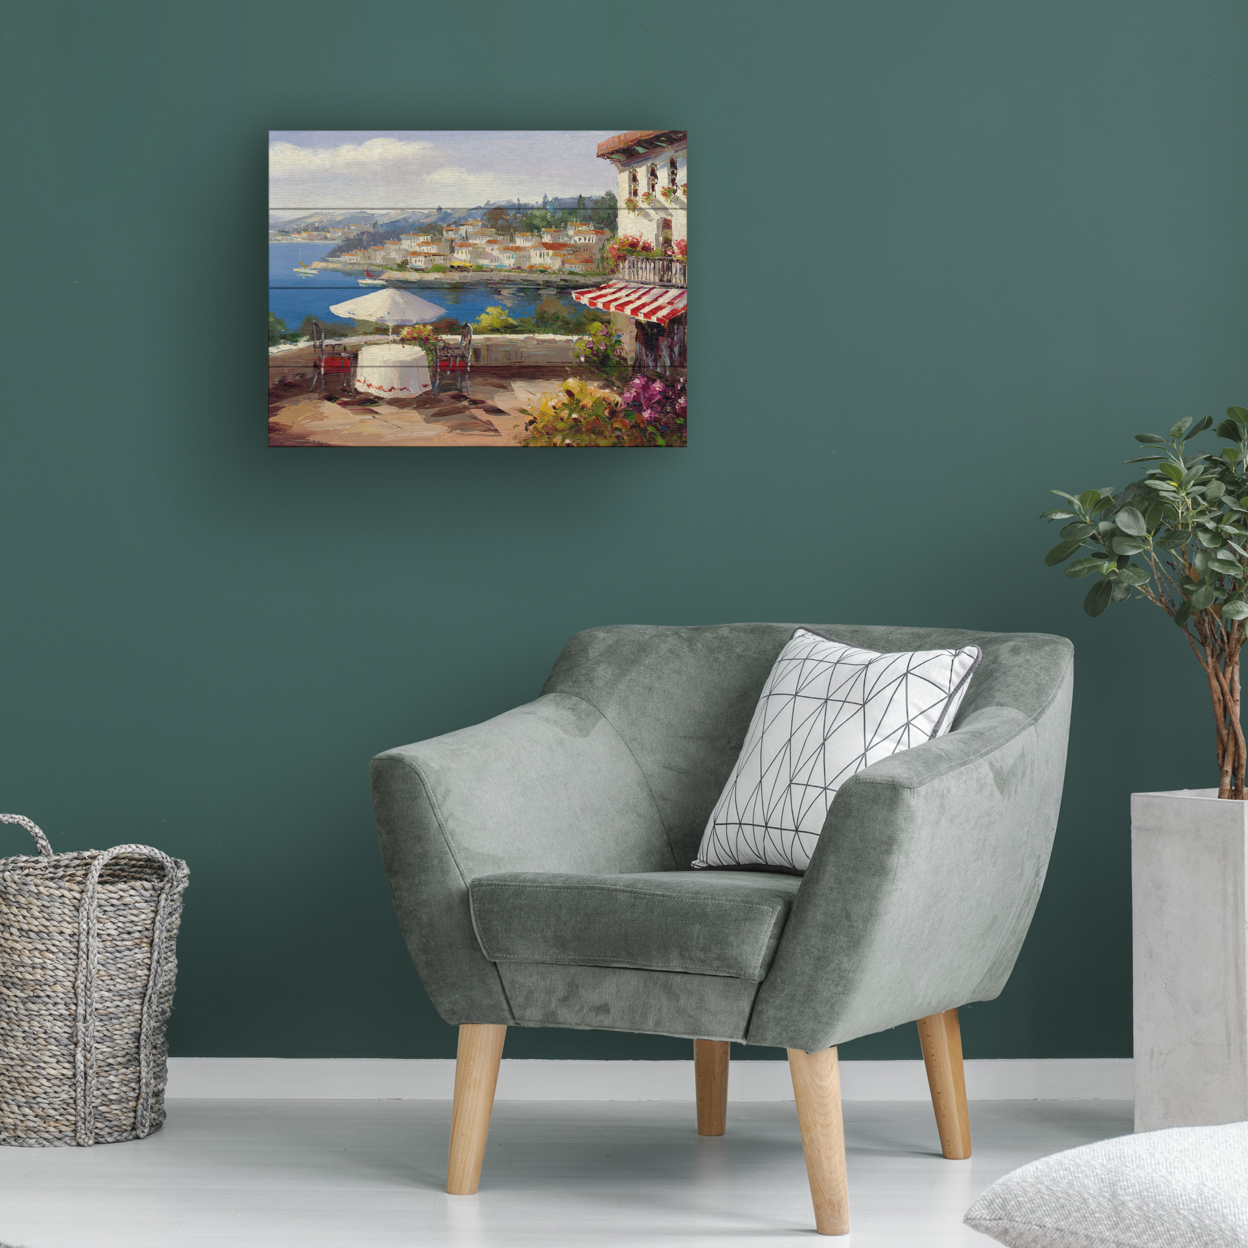 Wall Art 12 X 16 Inches Titled Italian Afternoon Ready To Hang Printed On Wooden Planks